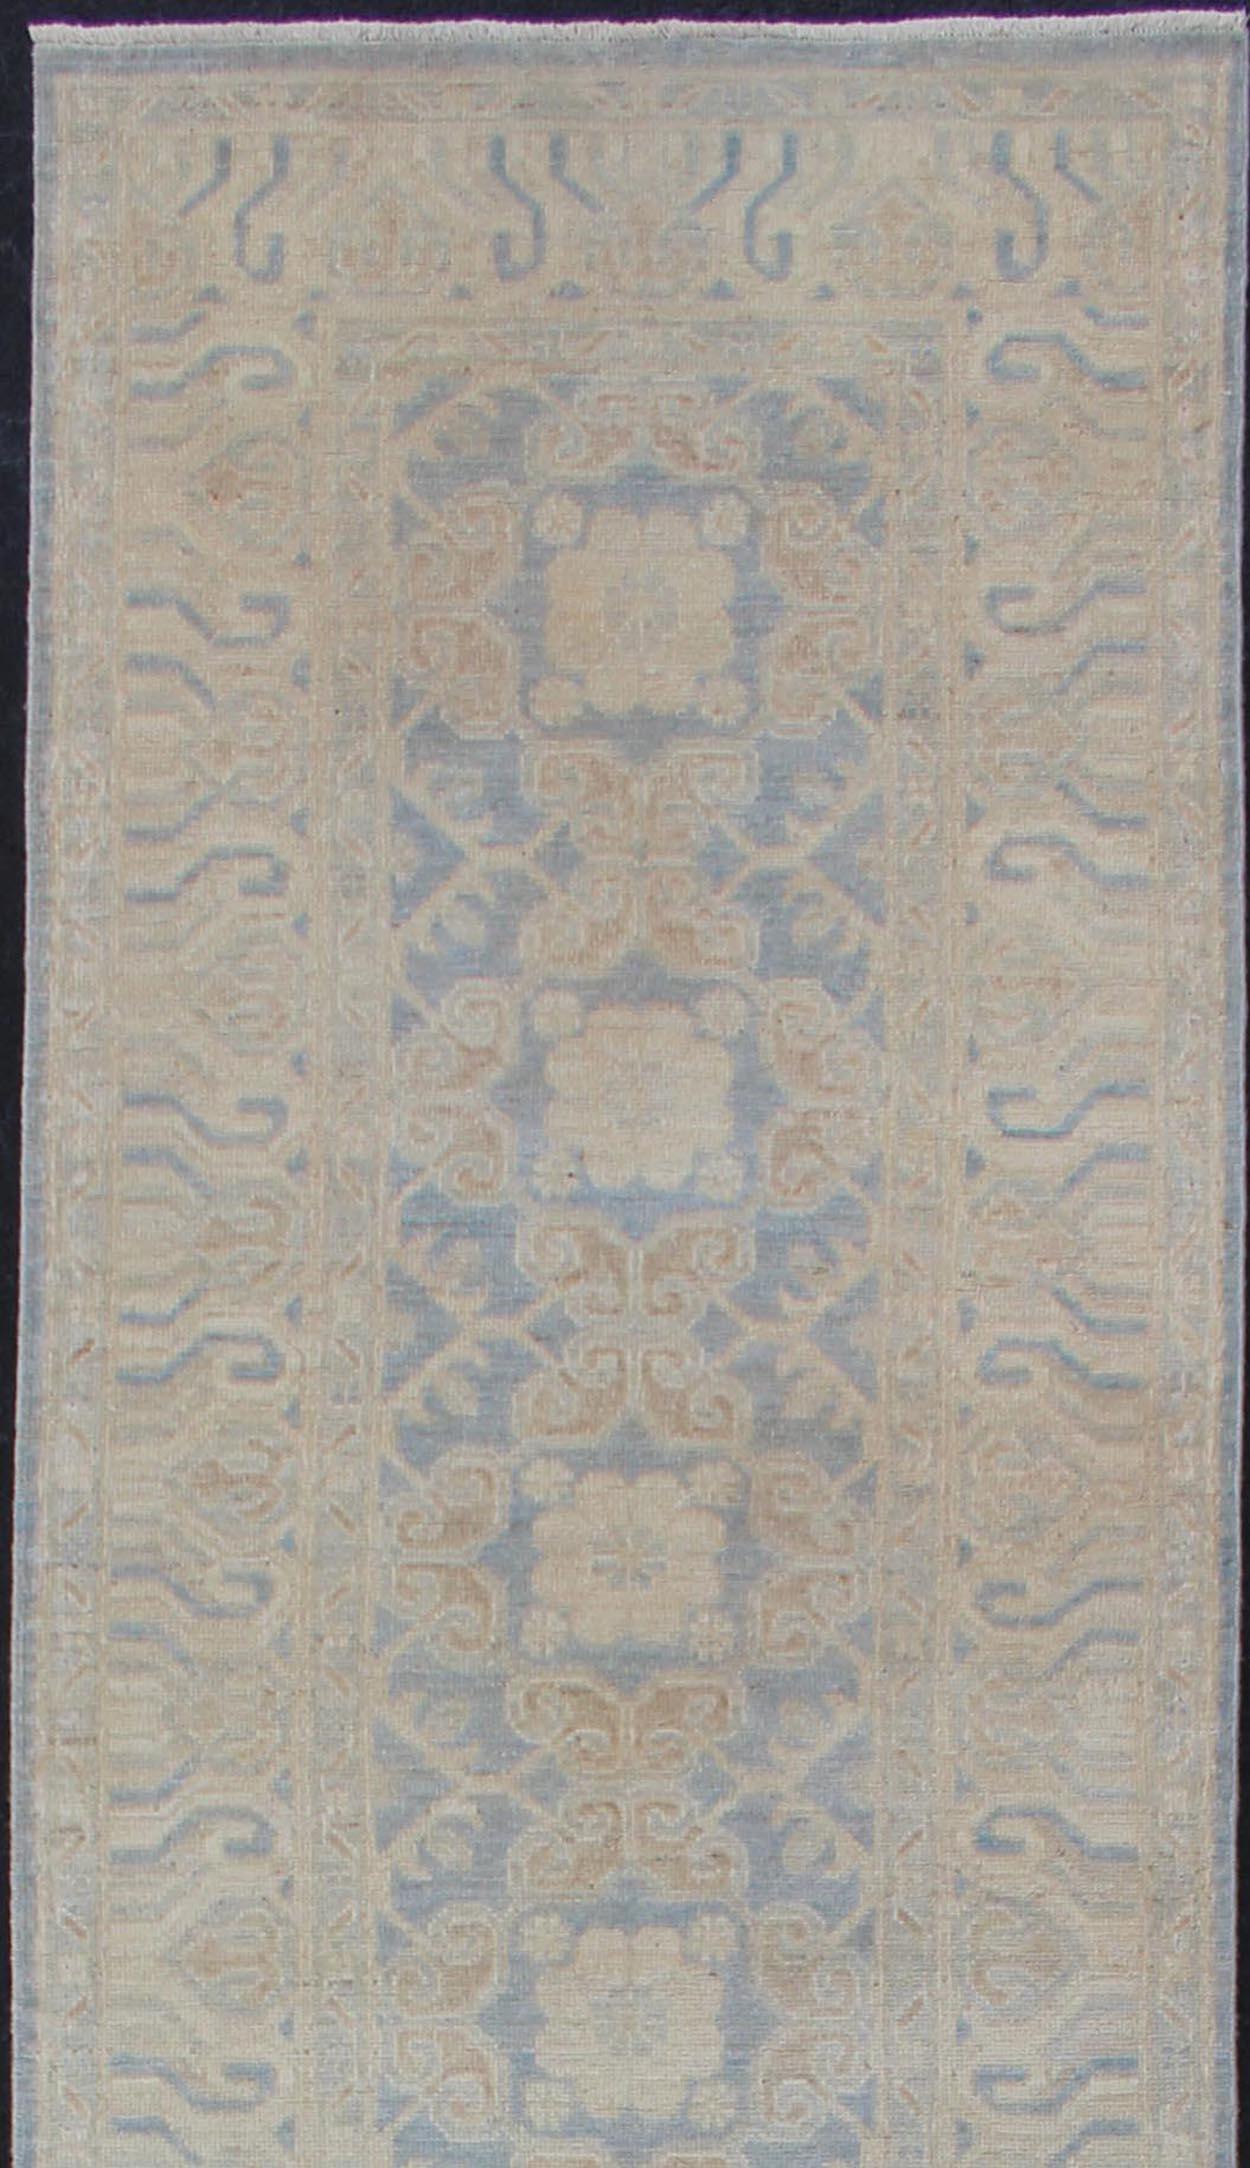 Afghan Khotan runner with Geometric Design in Shades of Powder Blue and Tan Keivan Woven Arts / rug MP-1911-10727, country of origin / type: Afghanistan / Khotan

This Khotan features a geometric multi-medallion design flanked by a repeating